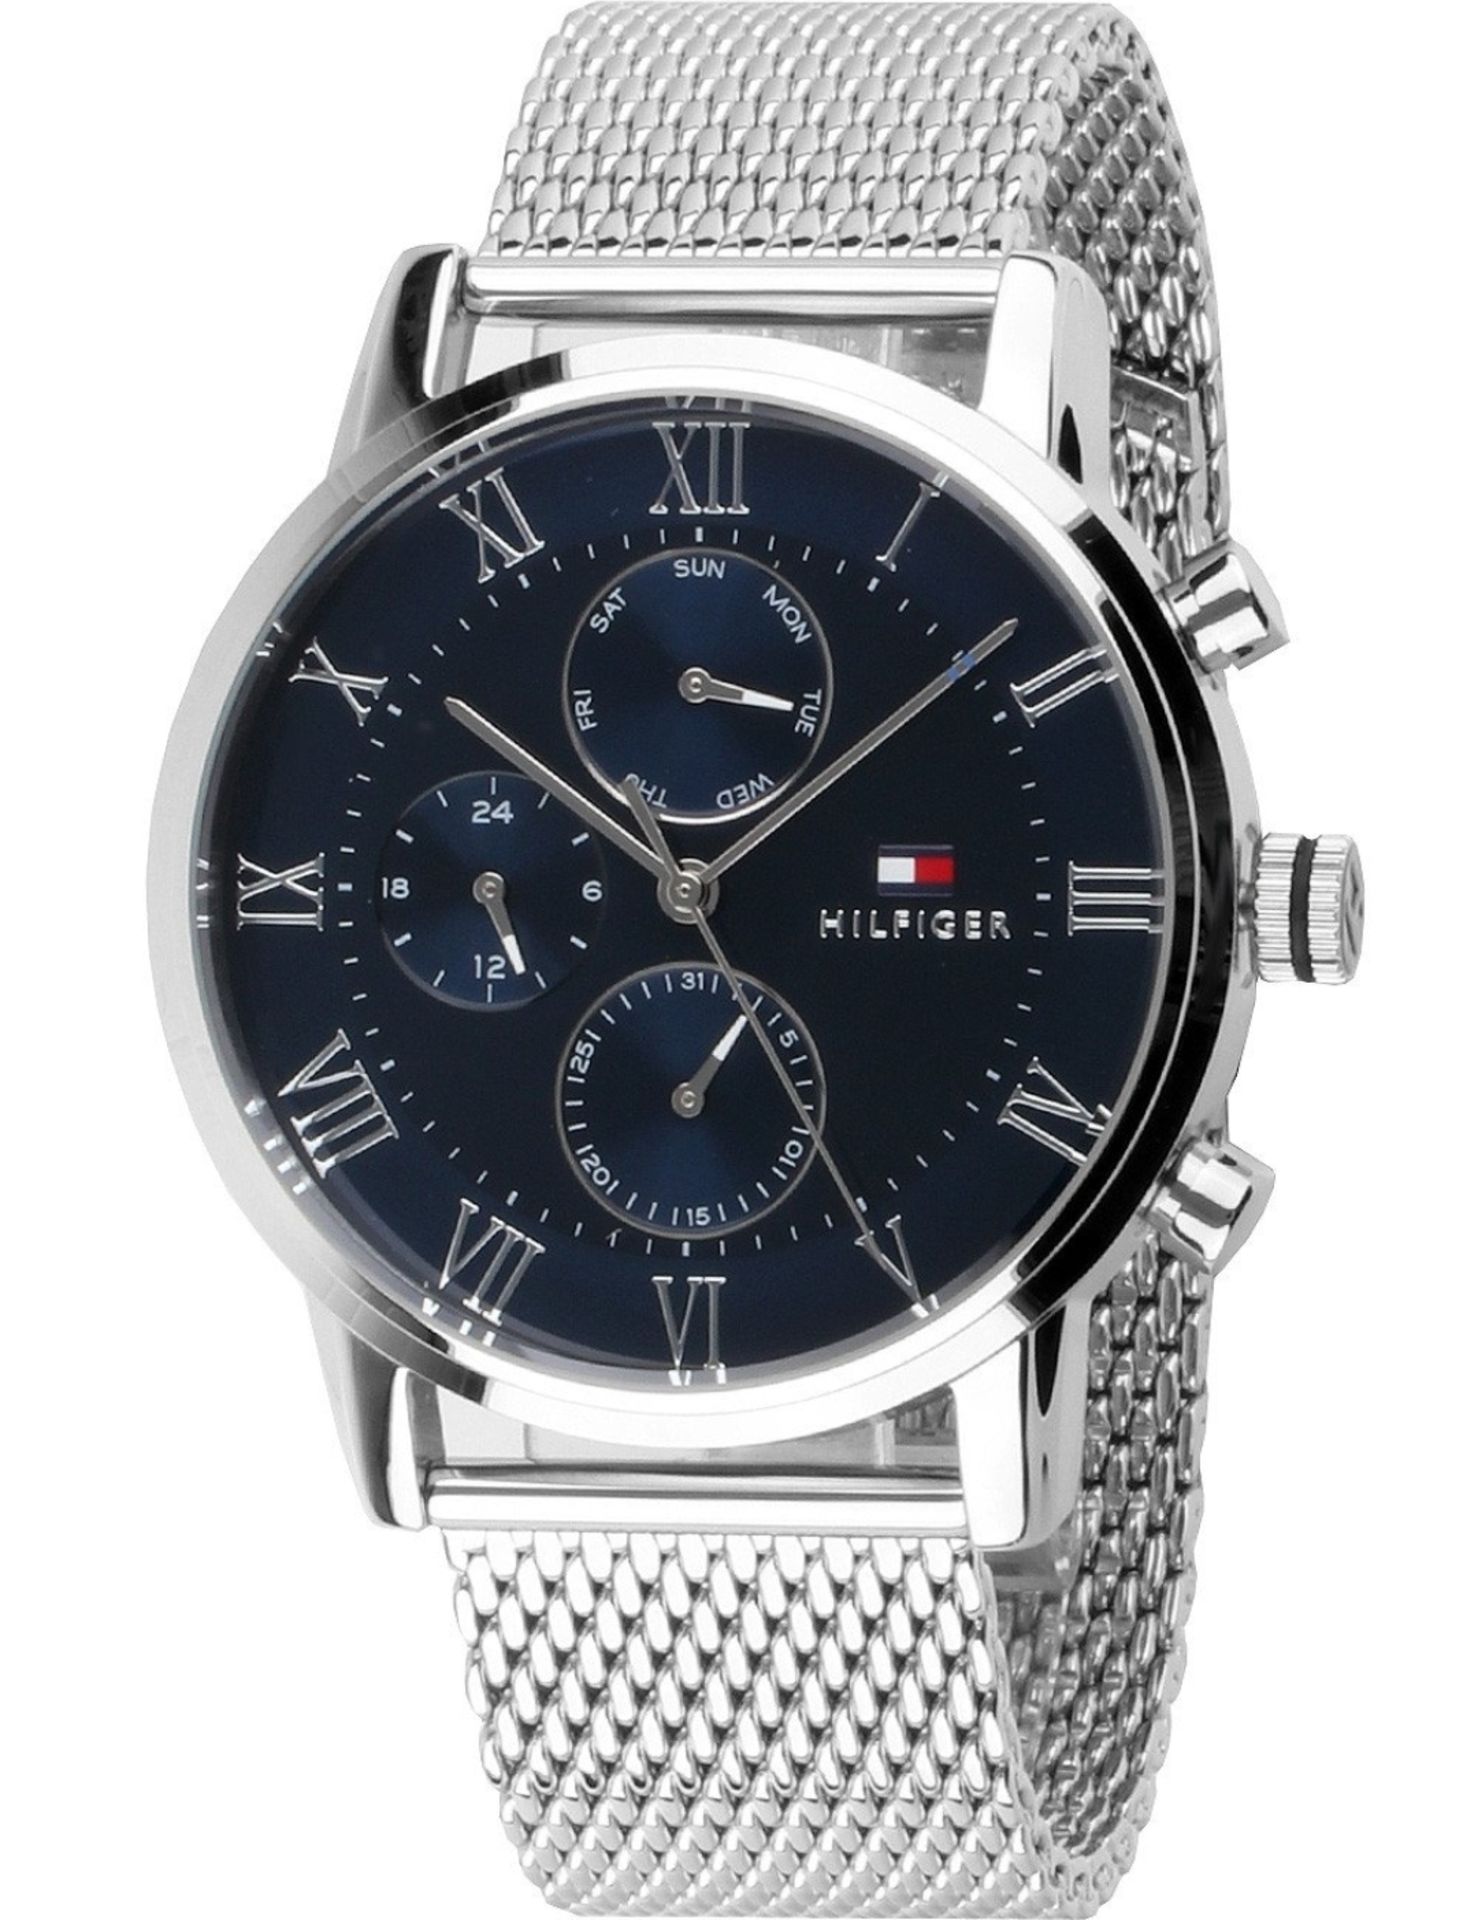 Tommy Hilfiger 1791398 Kane Men's 44mm Silver Mesh Band Chronograph Watch - Image 6 of 7